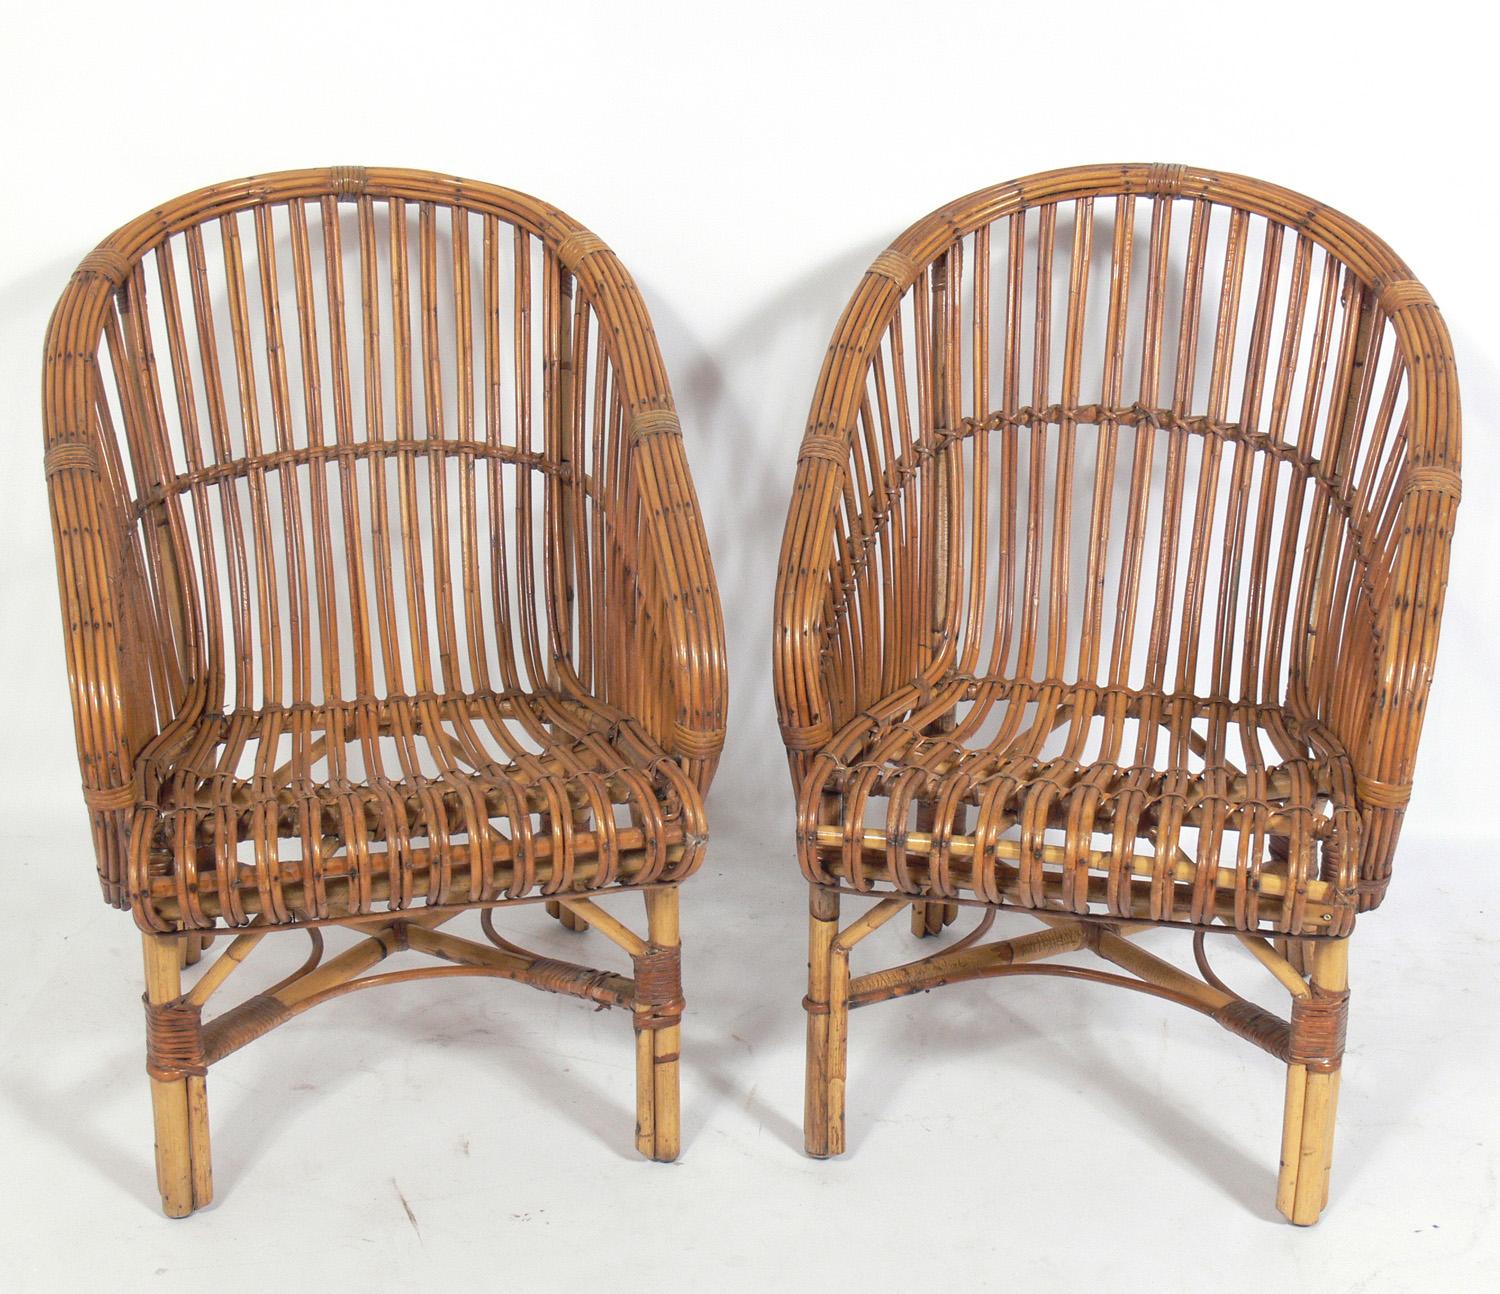 Mid-20th Century Pair of Curvaceous Rattan Chairs